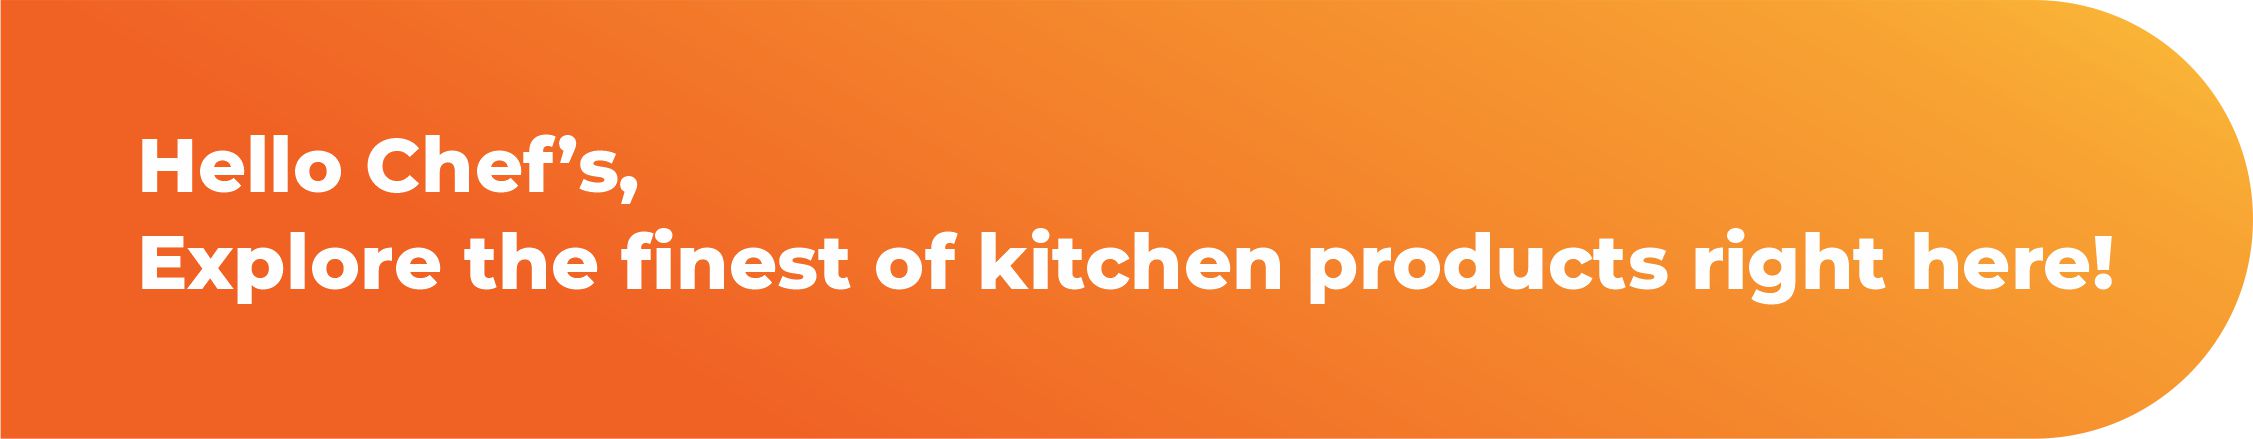 Hello Chef's, Explore the finest of kitchen products right here!